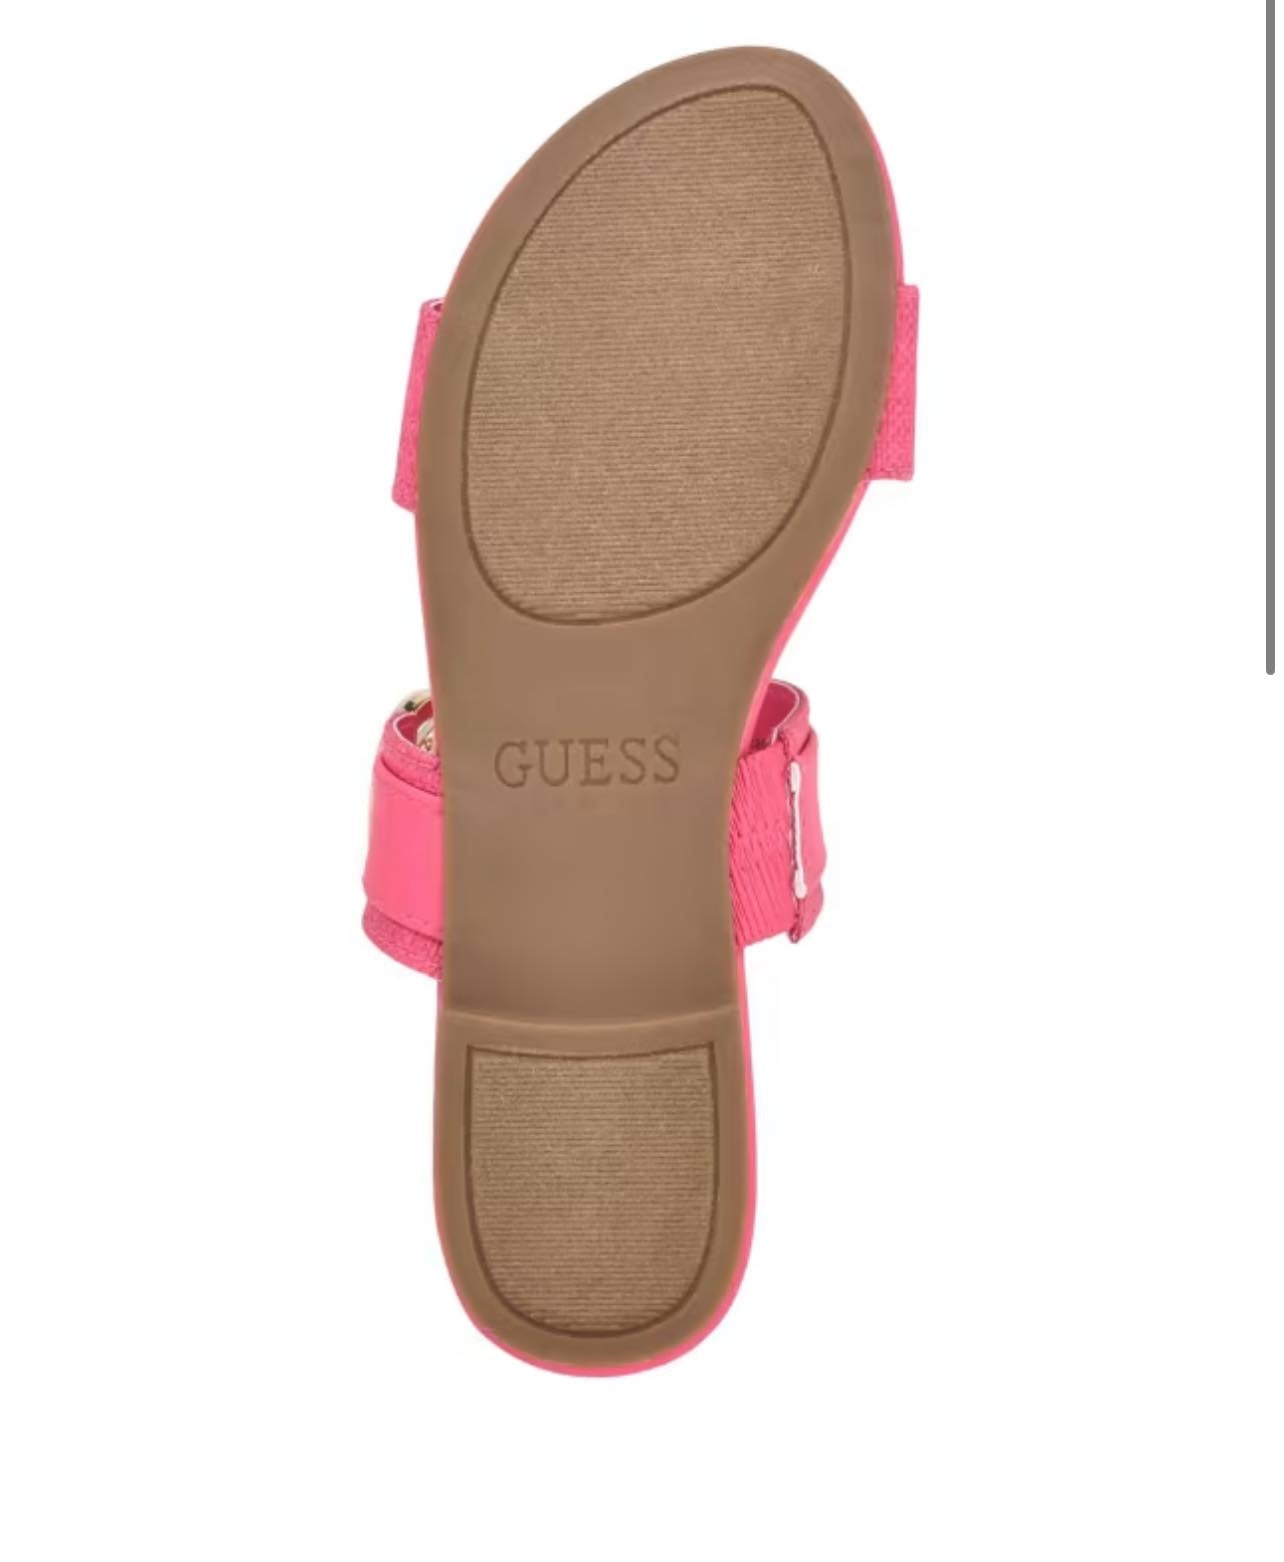 Guess Lowered Double Band Slide Sandals- Light Pink (UK 7)